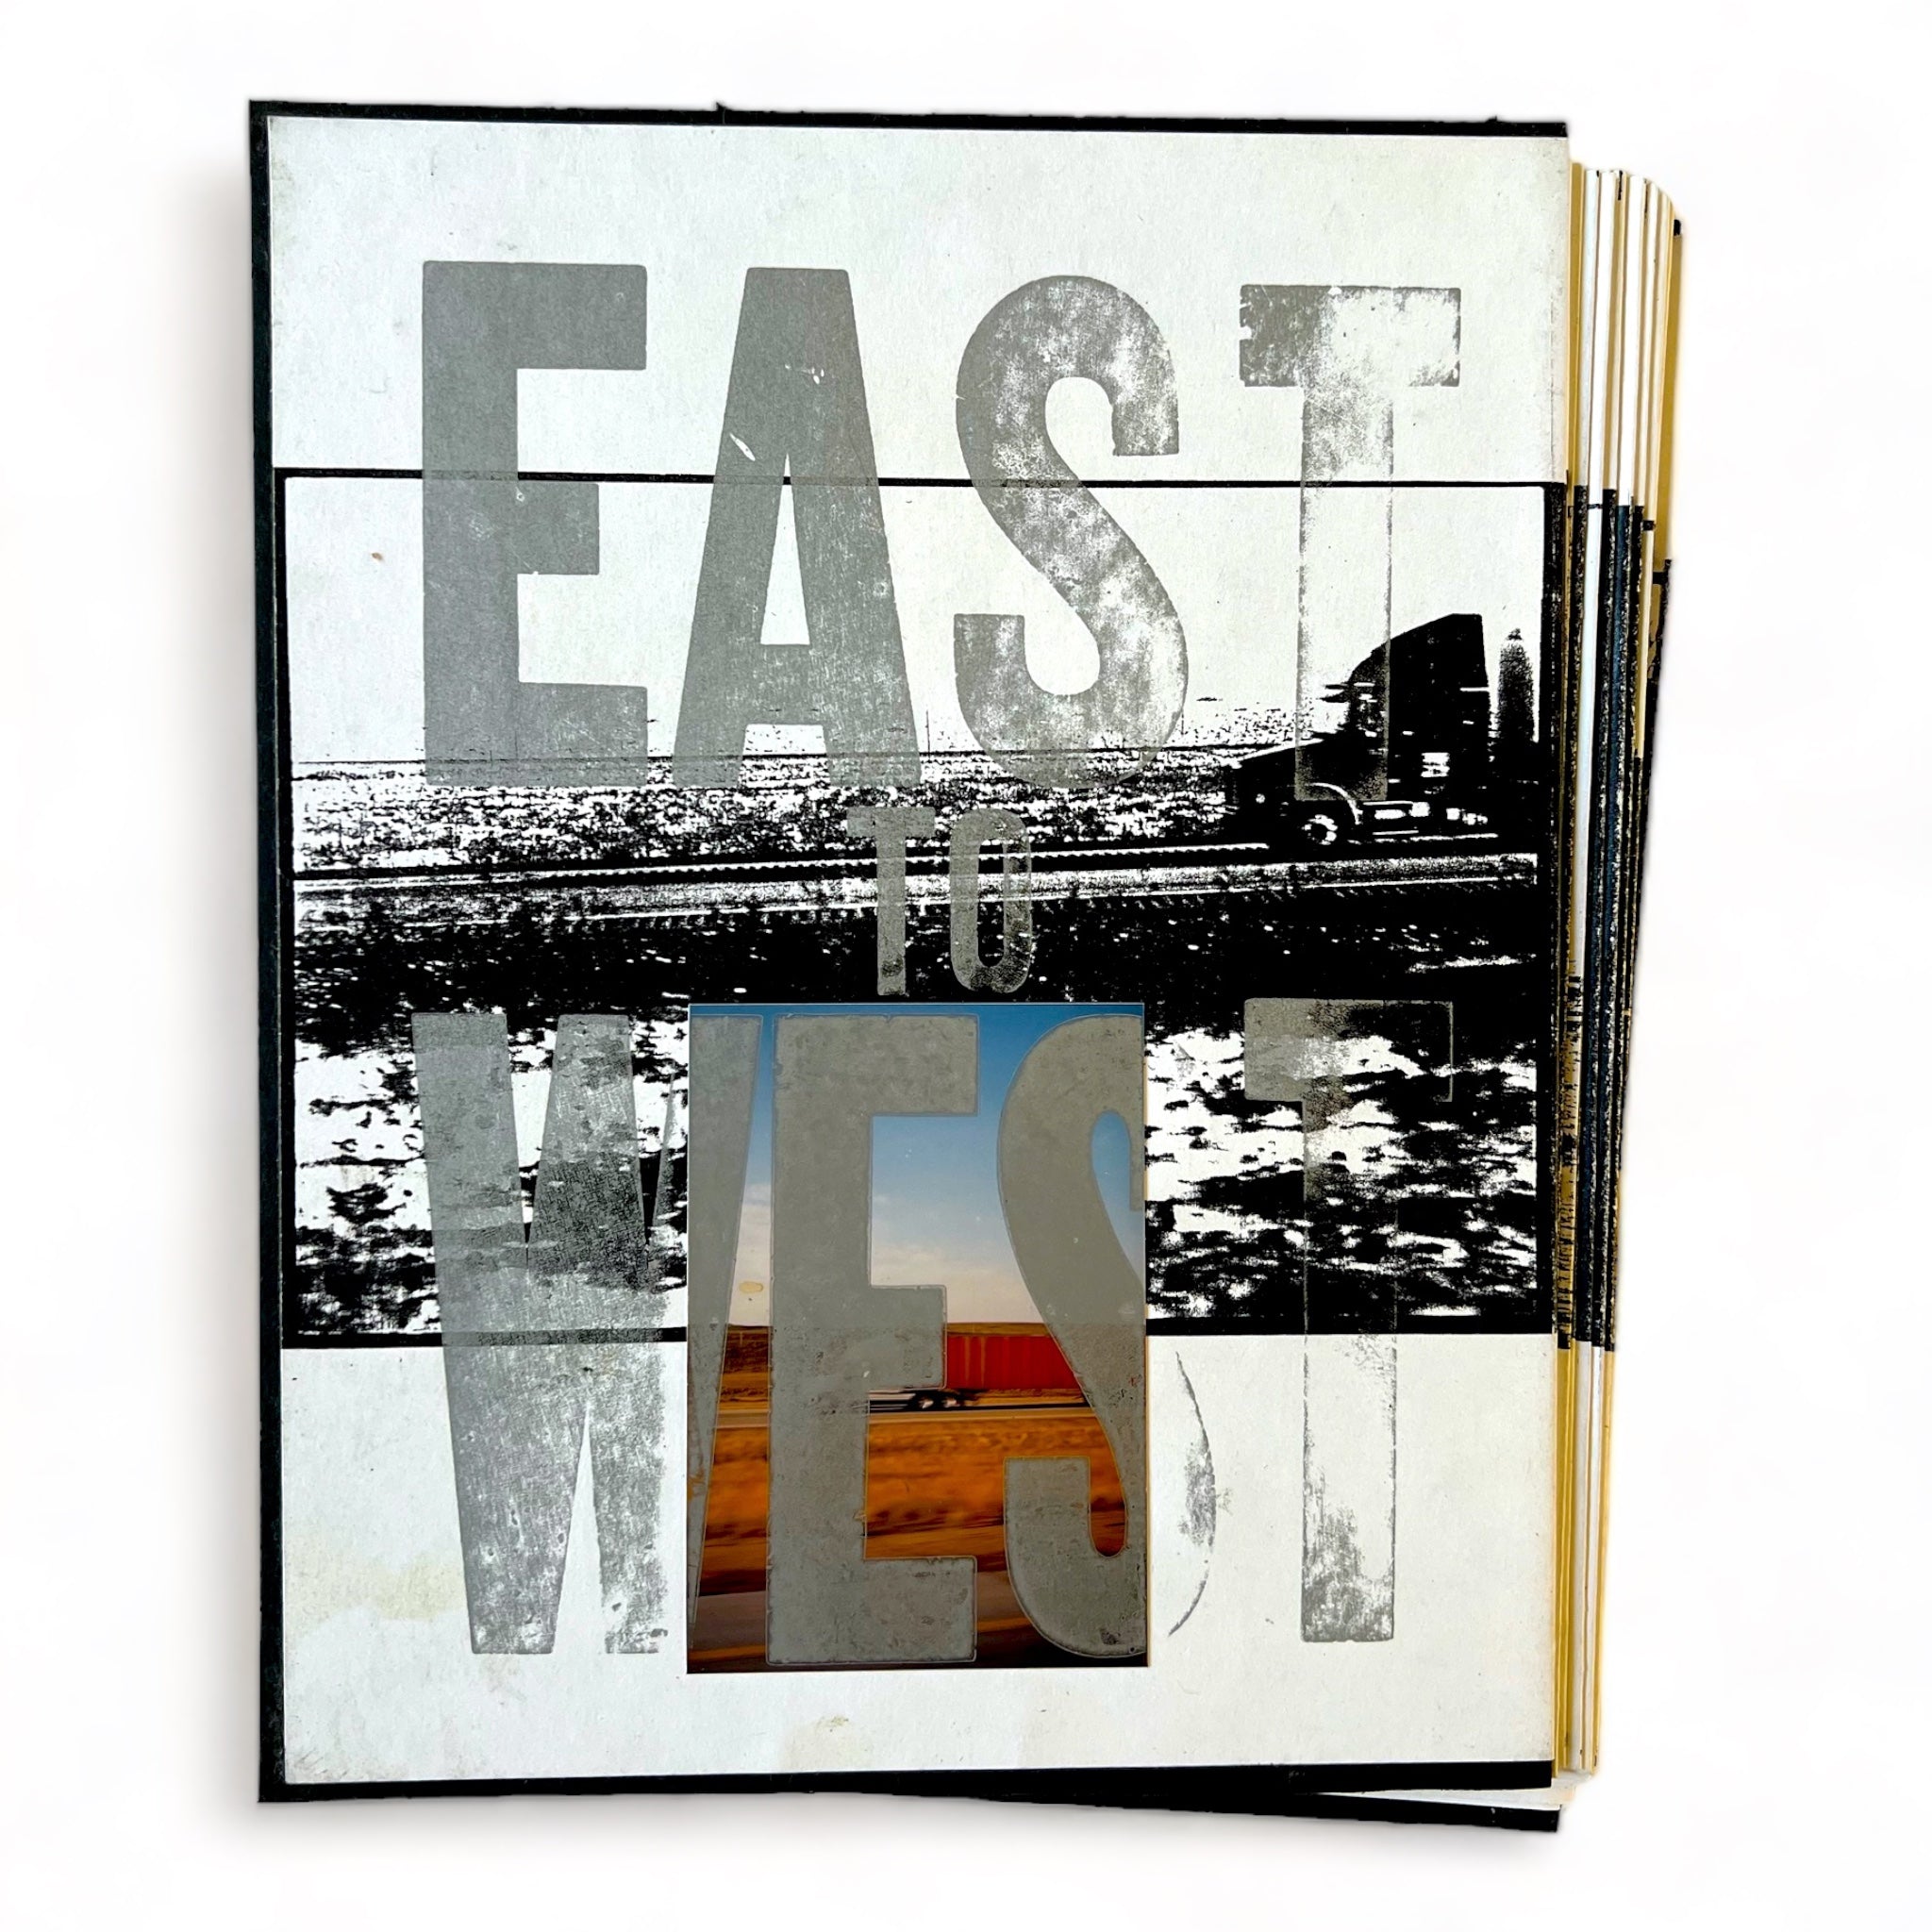 Cynthia Connolly, East To West: Trucks Driving, 1999